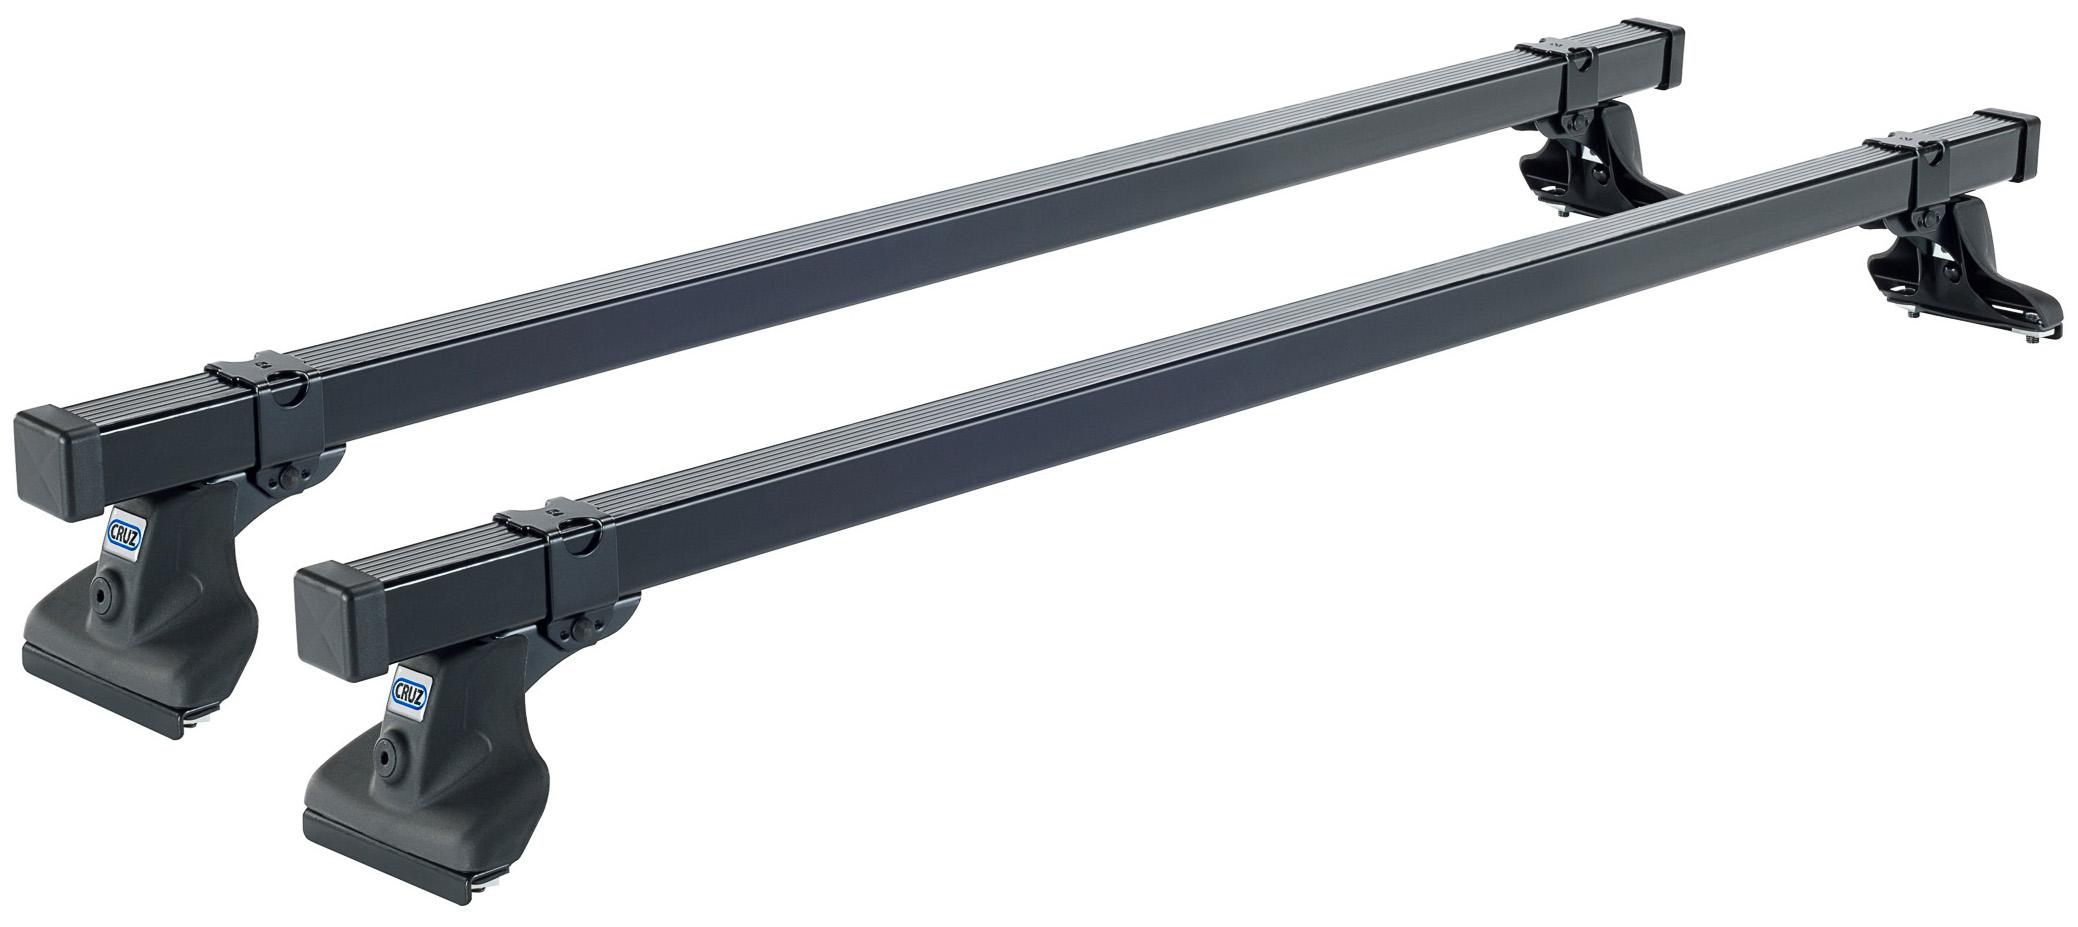 Cruz Commercial Roof Bars 35 X 35 923-105 - Pack Of 2